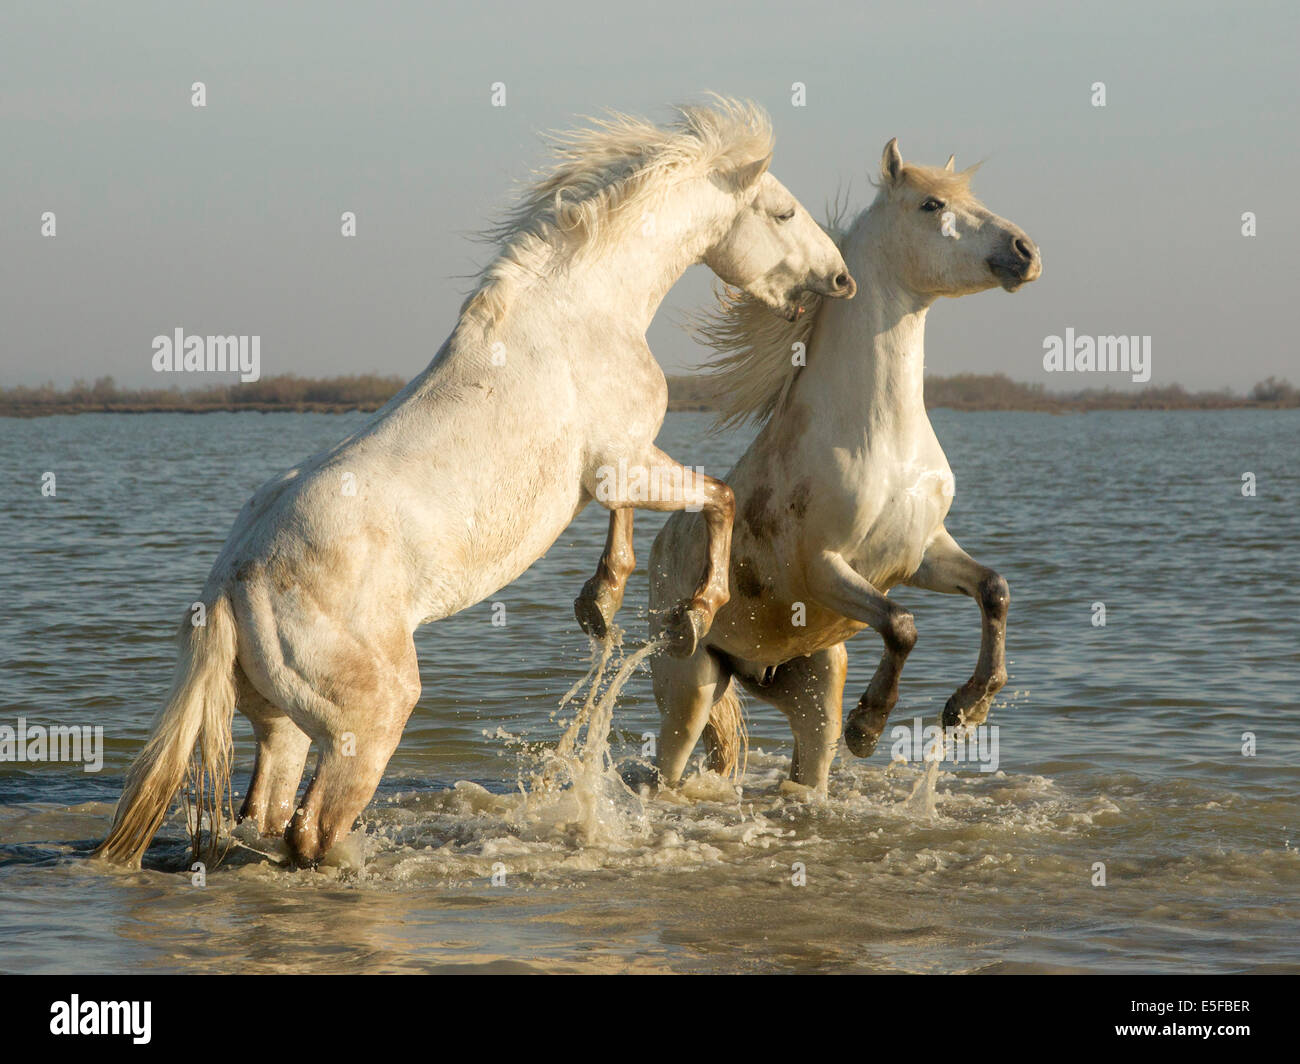 Camargue horses, stallions sparring in water Stock Photo